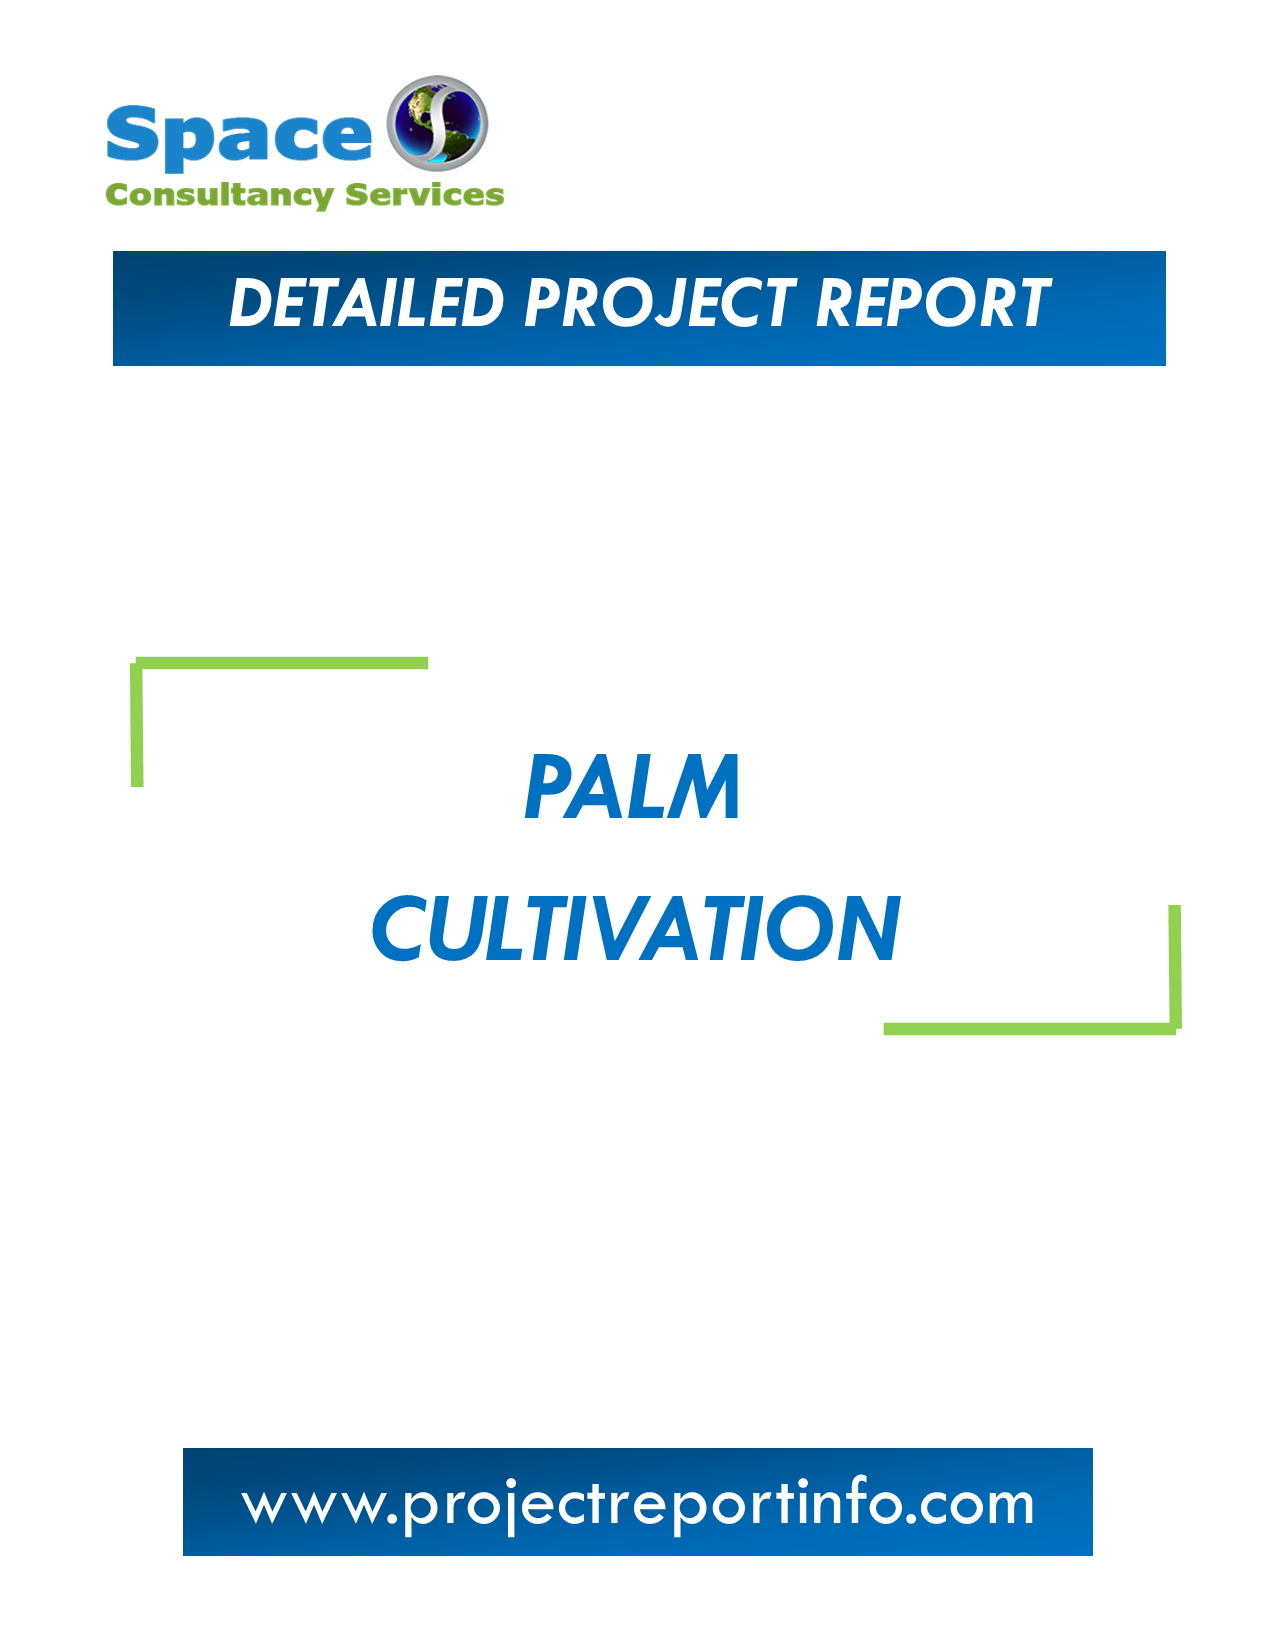 Project Report on Palm Cultivation